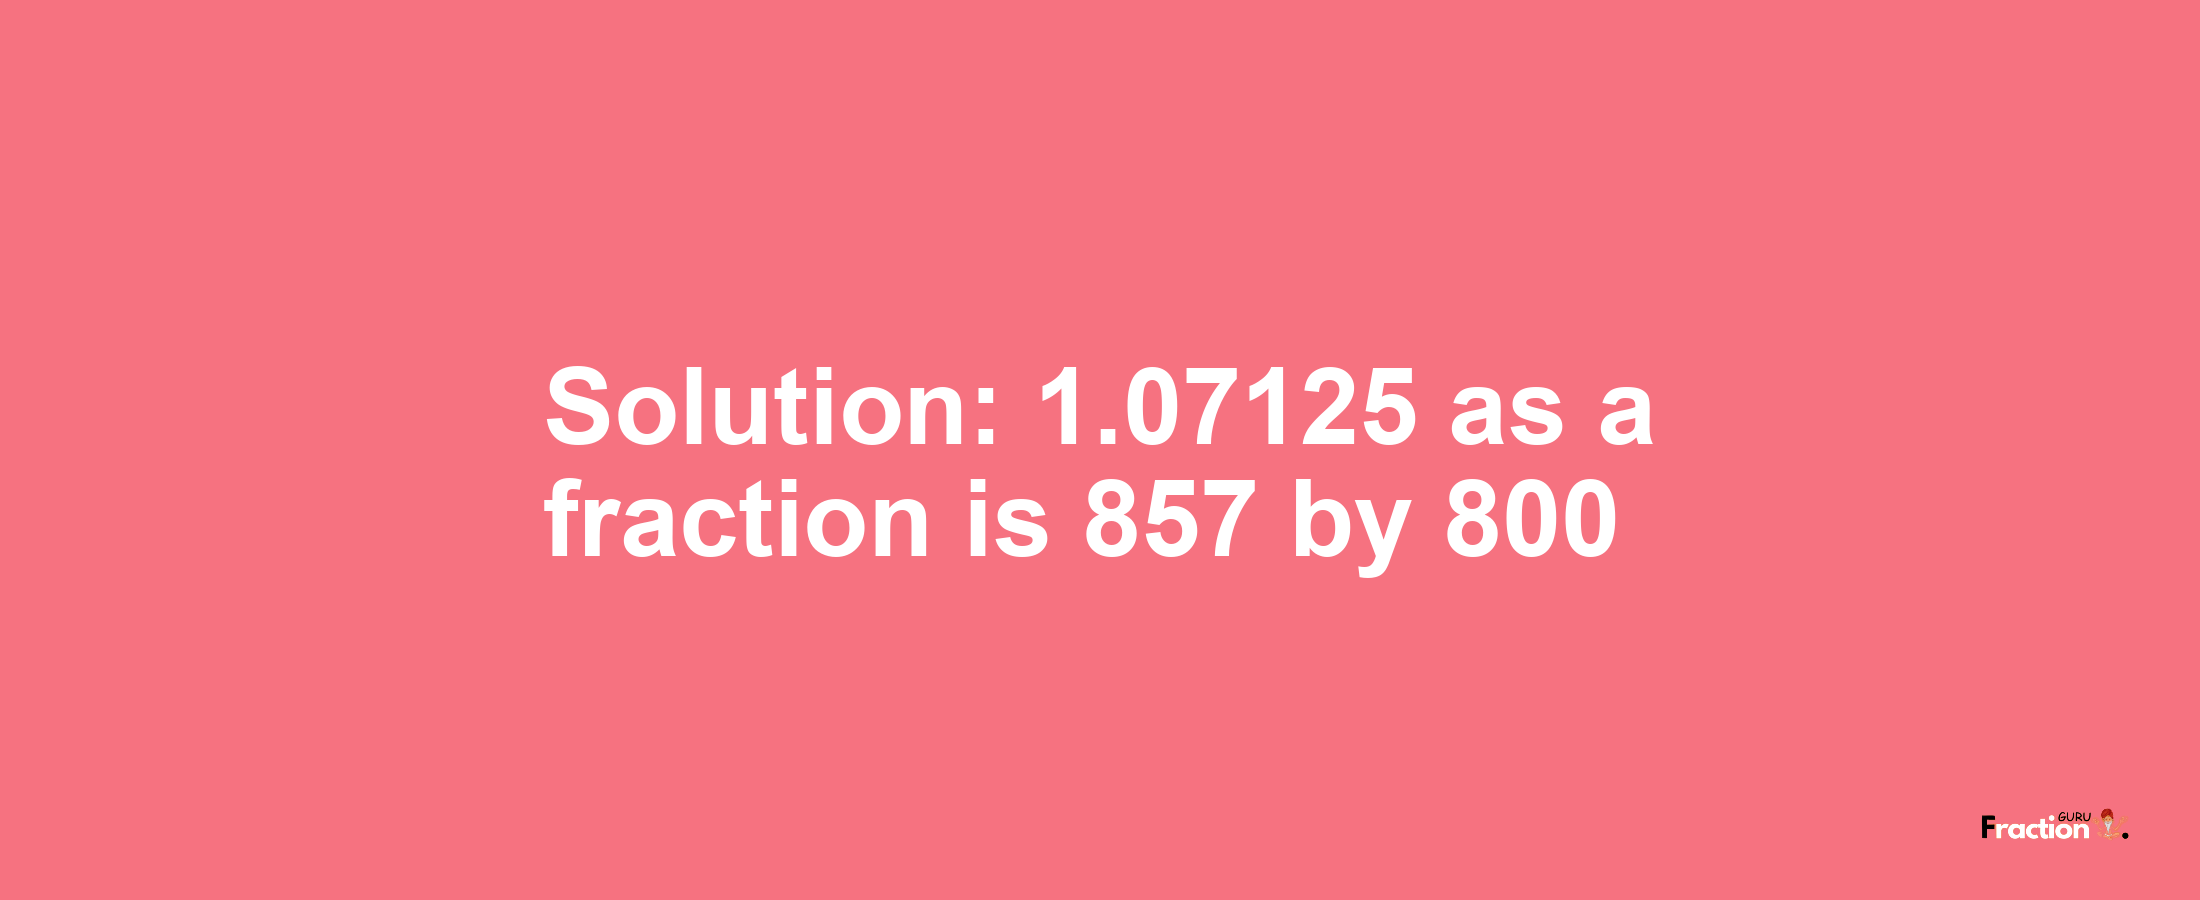 Solution:1.07125 as a fraction is 857/800